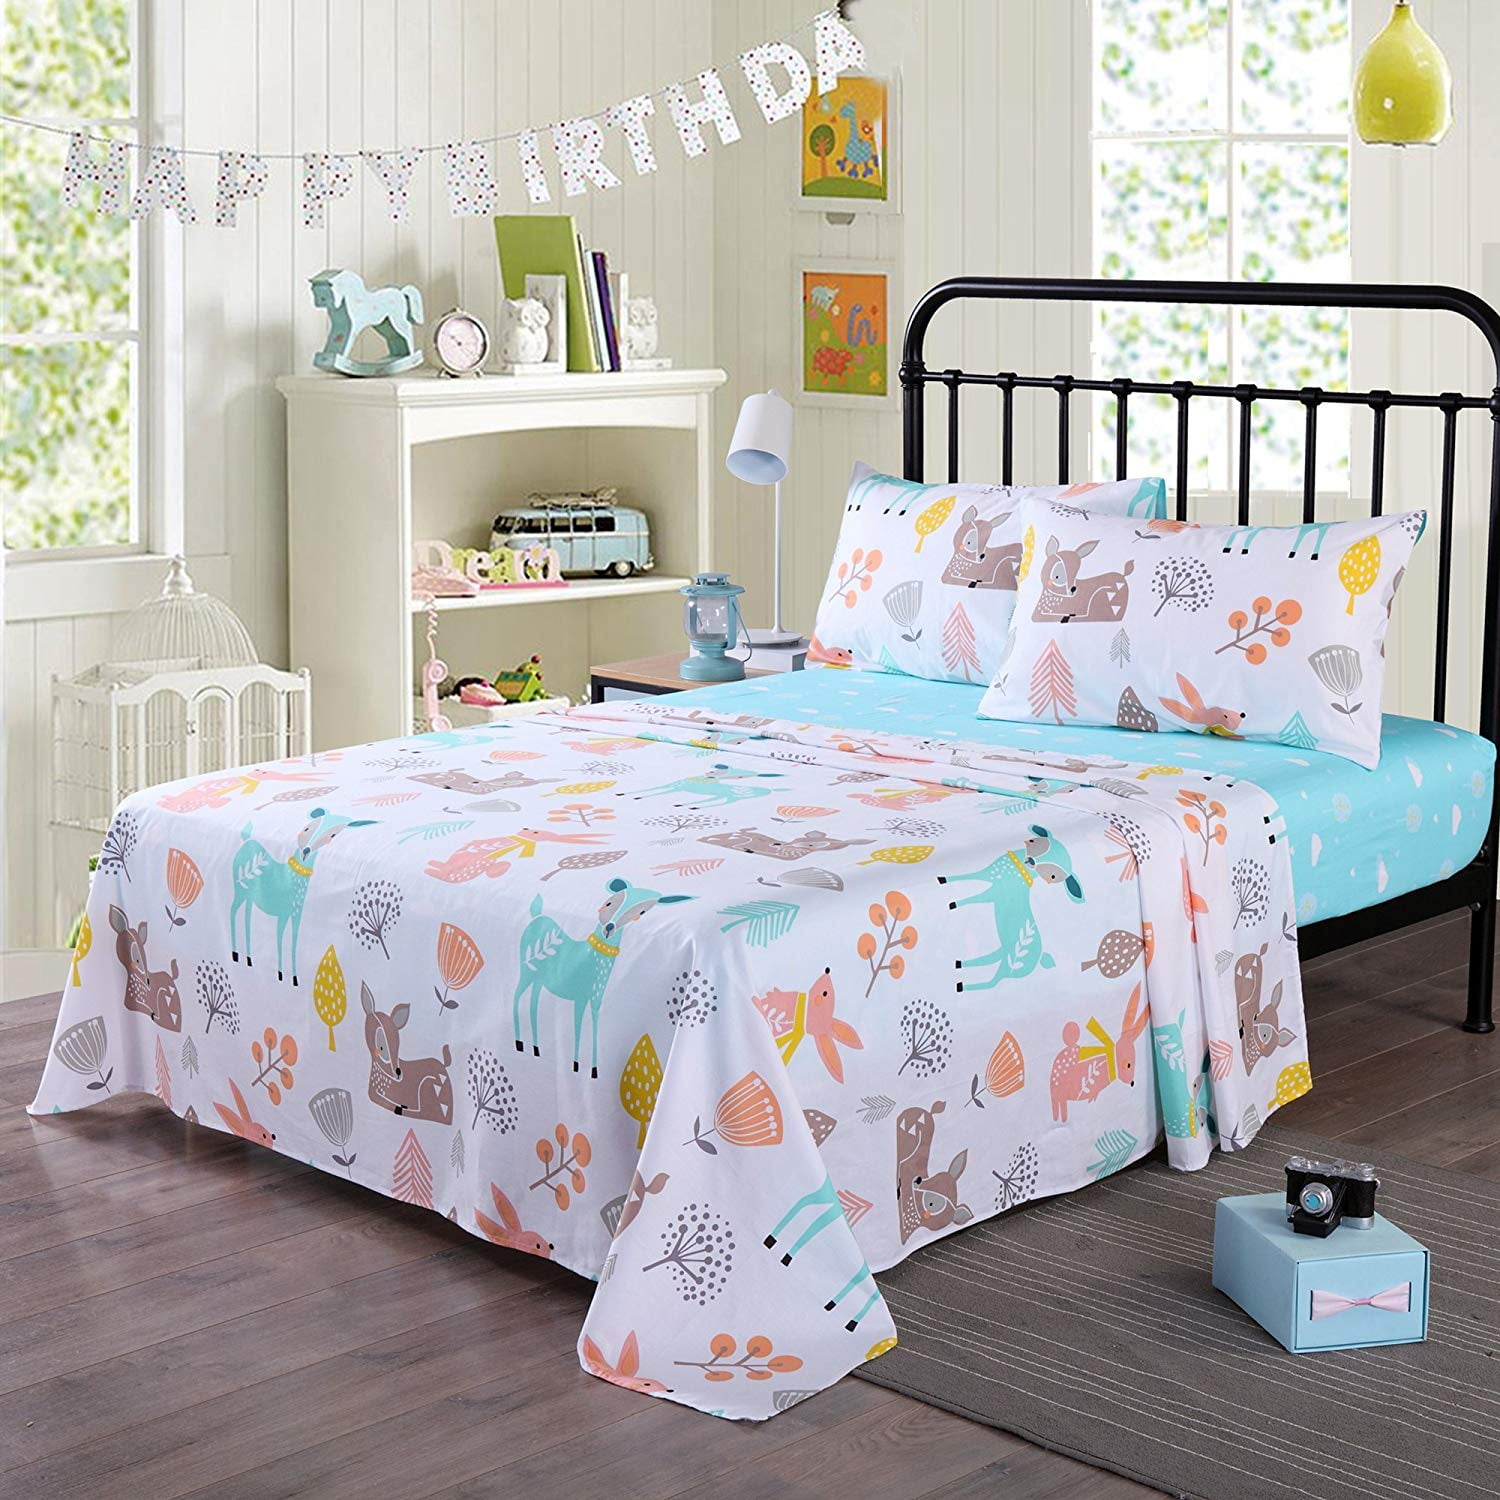 100% Cotton Sheets Kids Twin Sheets for Kids Girls Boys Teens Children  Sheets Bed Sheets for Kids Soft Fitted Flat Printed Sheet Pillowcase  Bedding